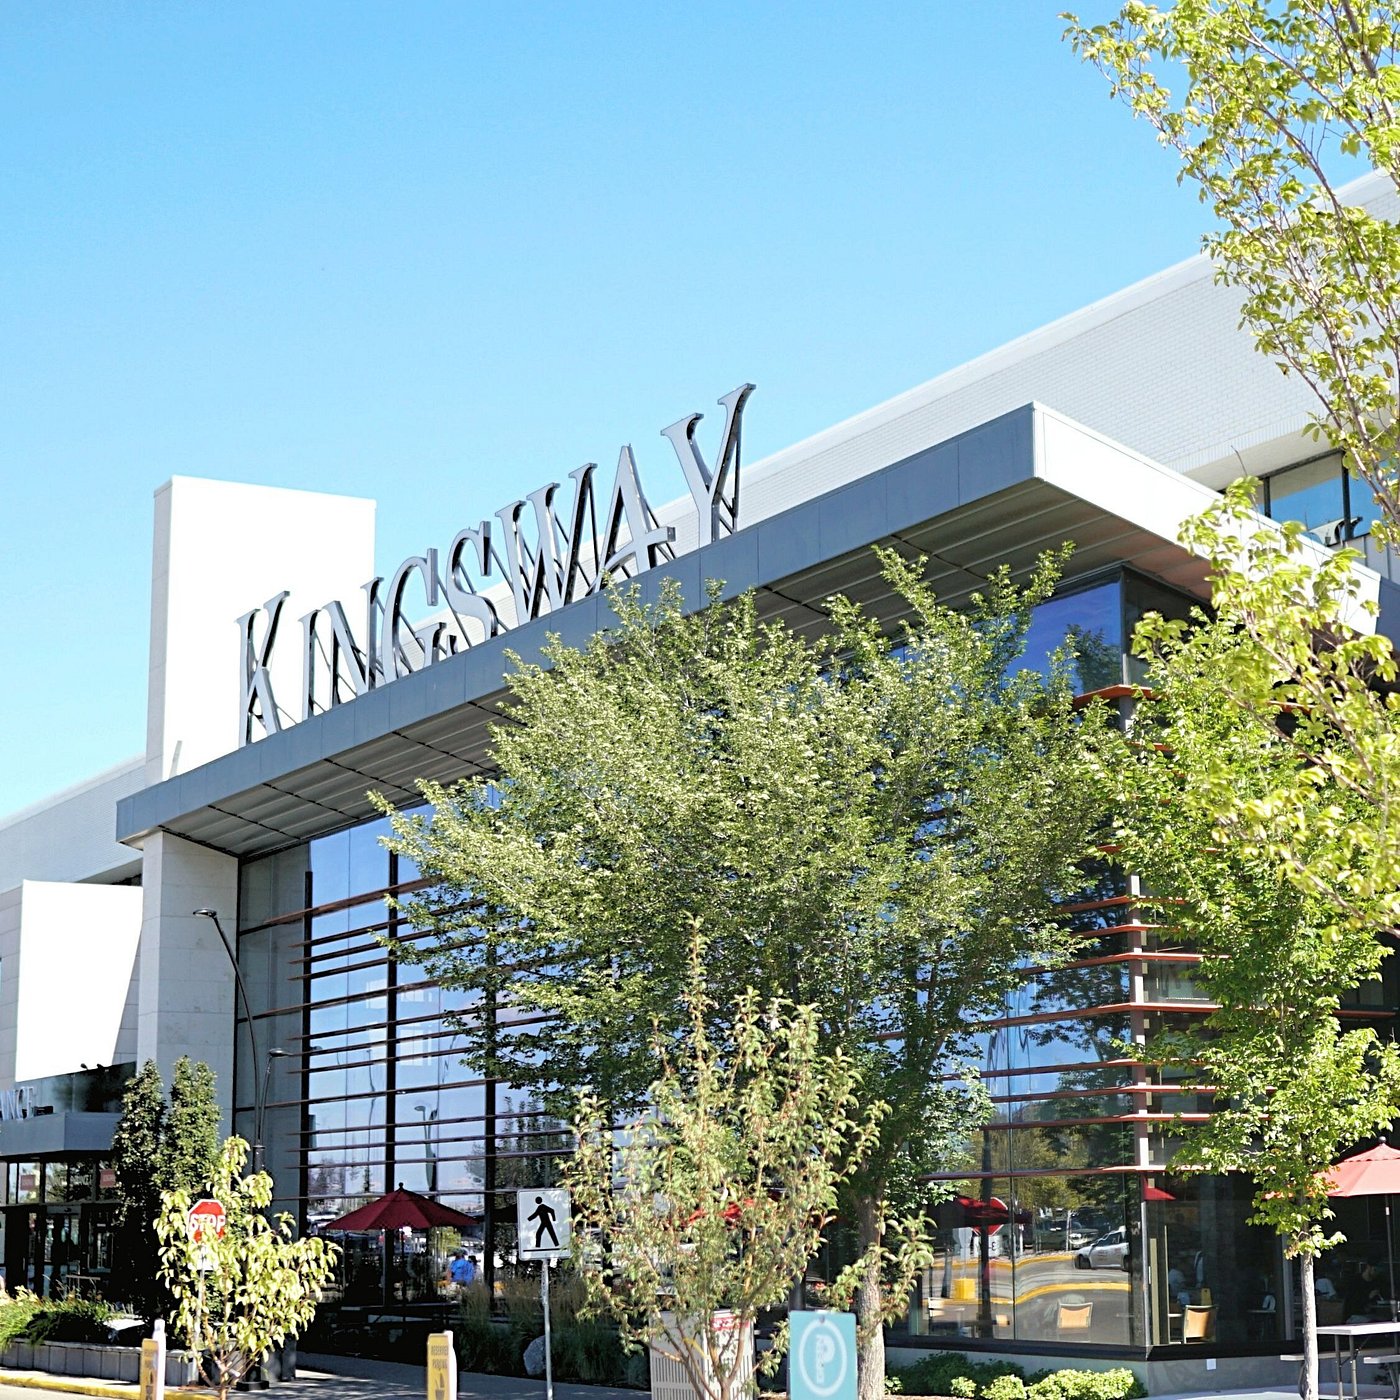 An image of the exterior of Kingsway Mall on a sunny day. The sky is clear and blue and trees surround the building.